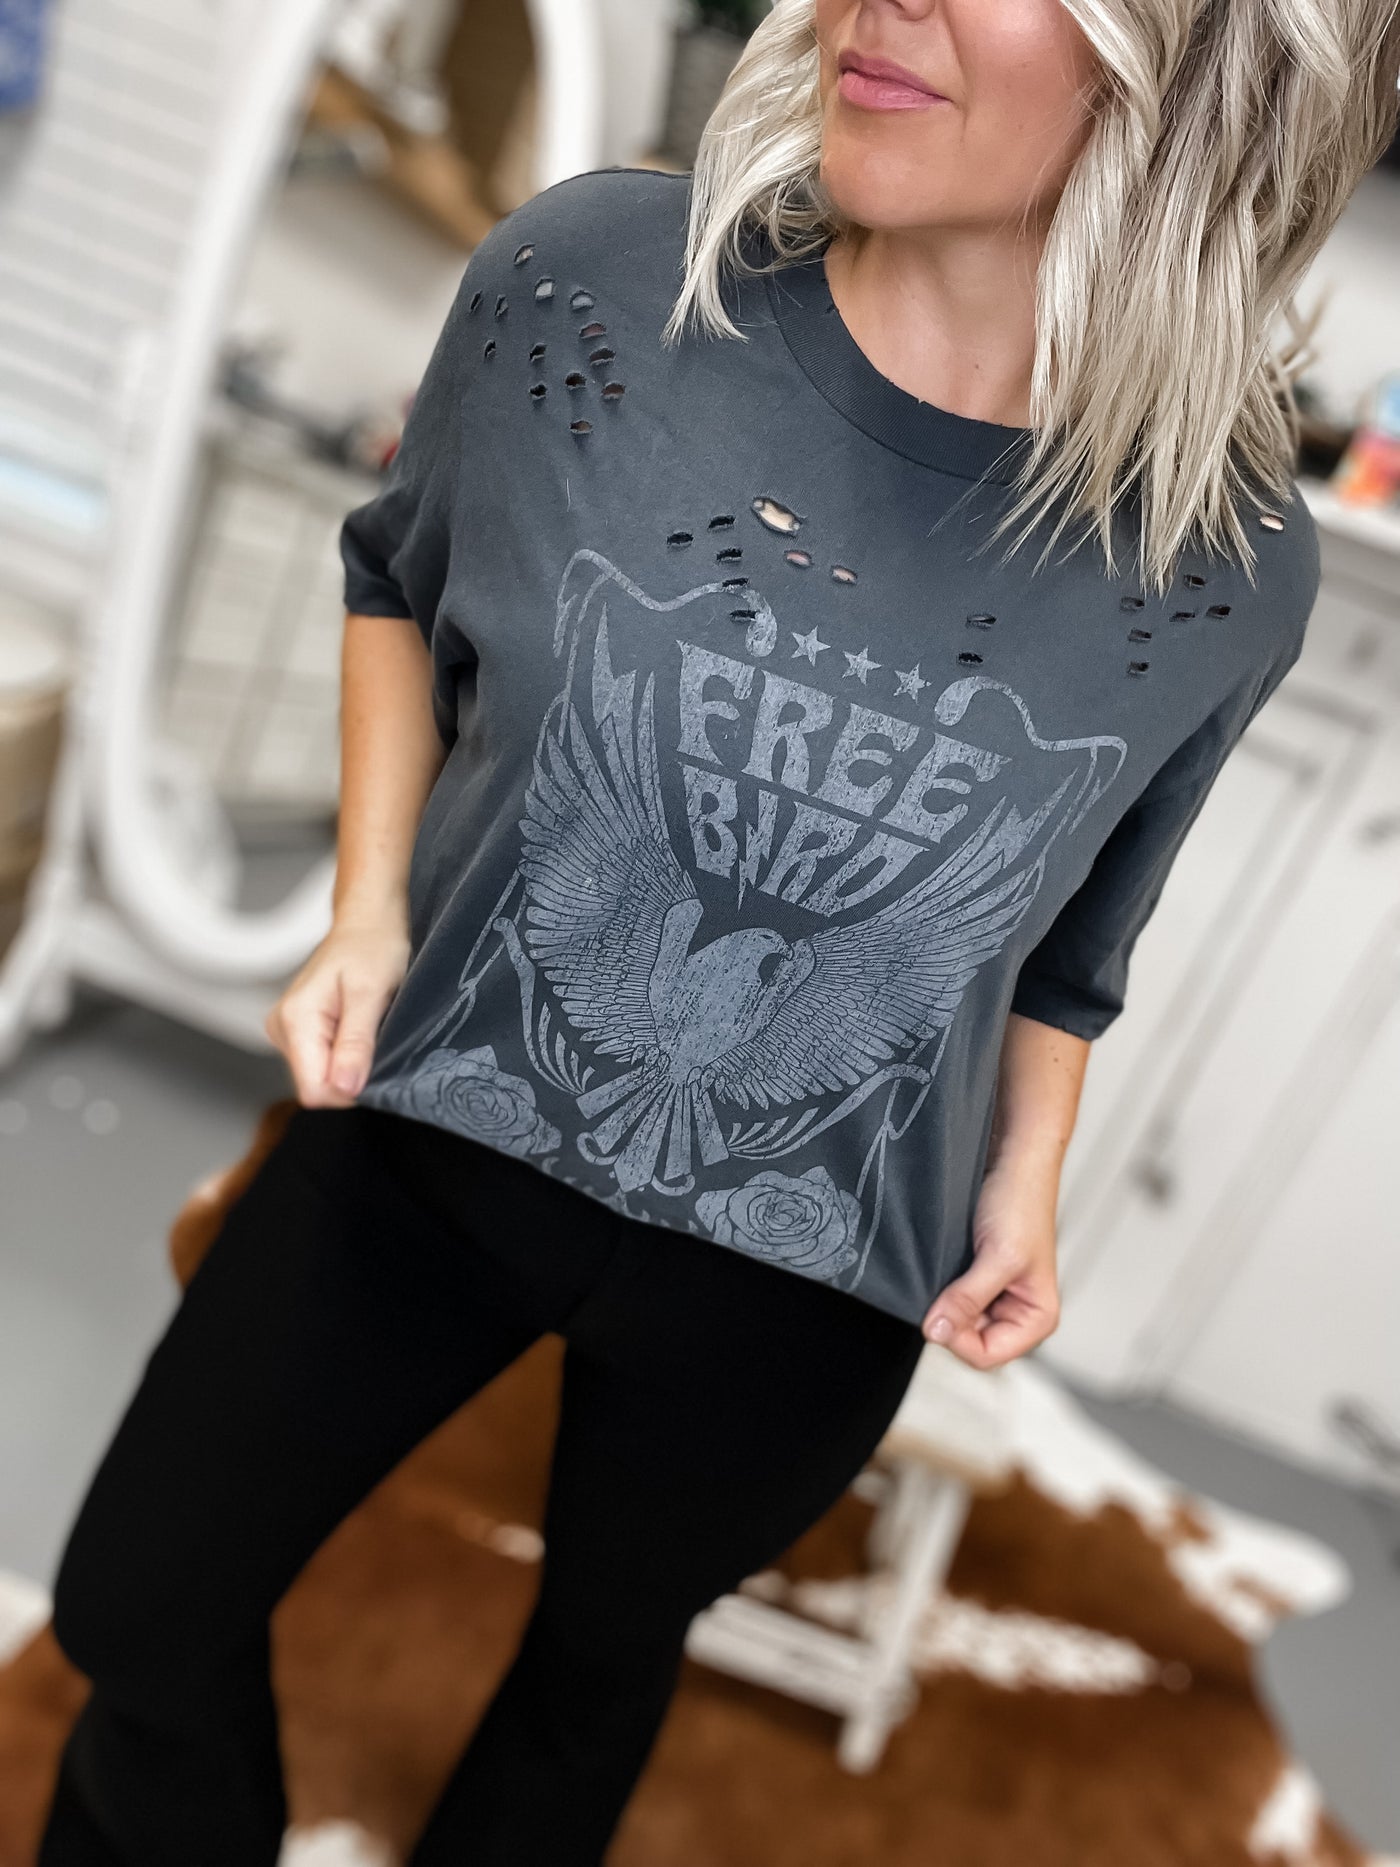 Free Bird Distressed Oversized Tee by Zutter